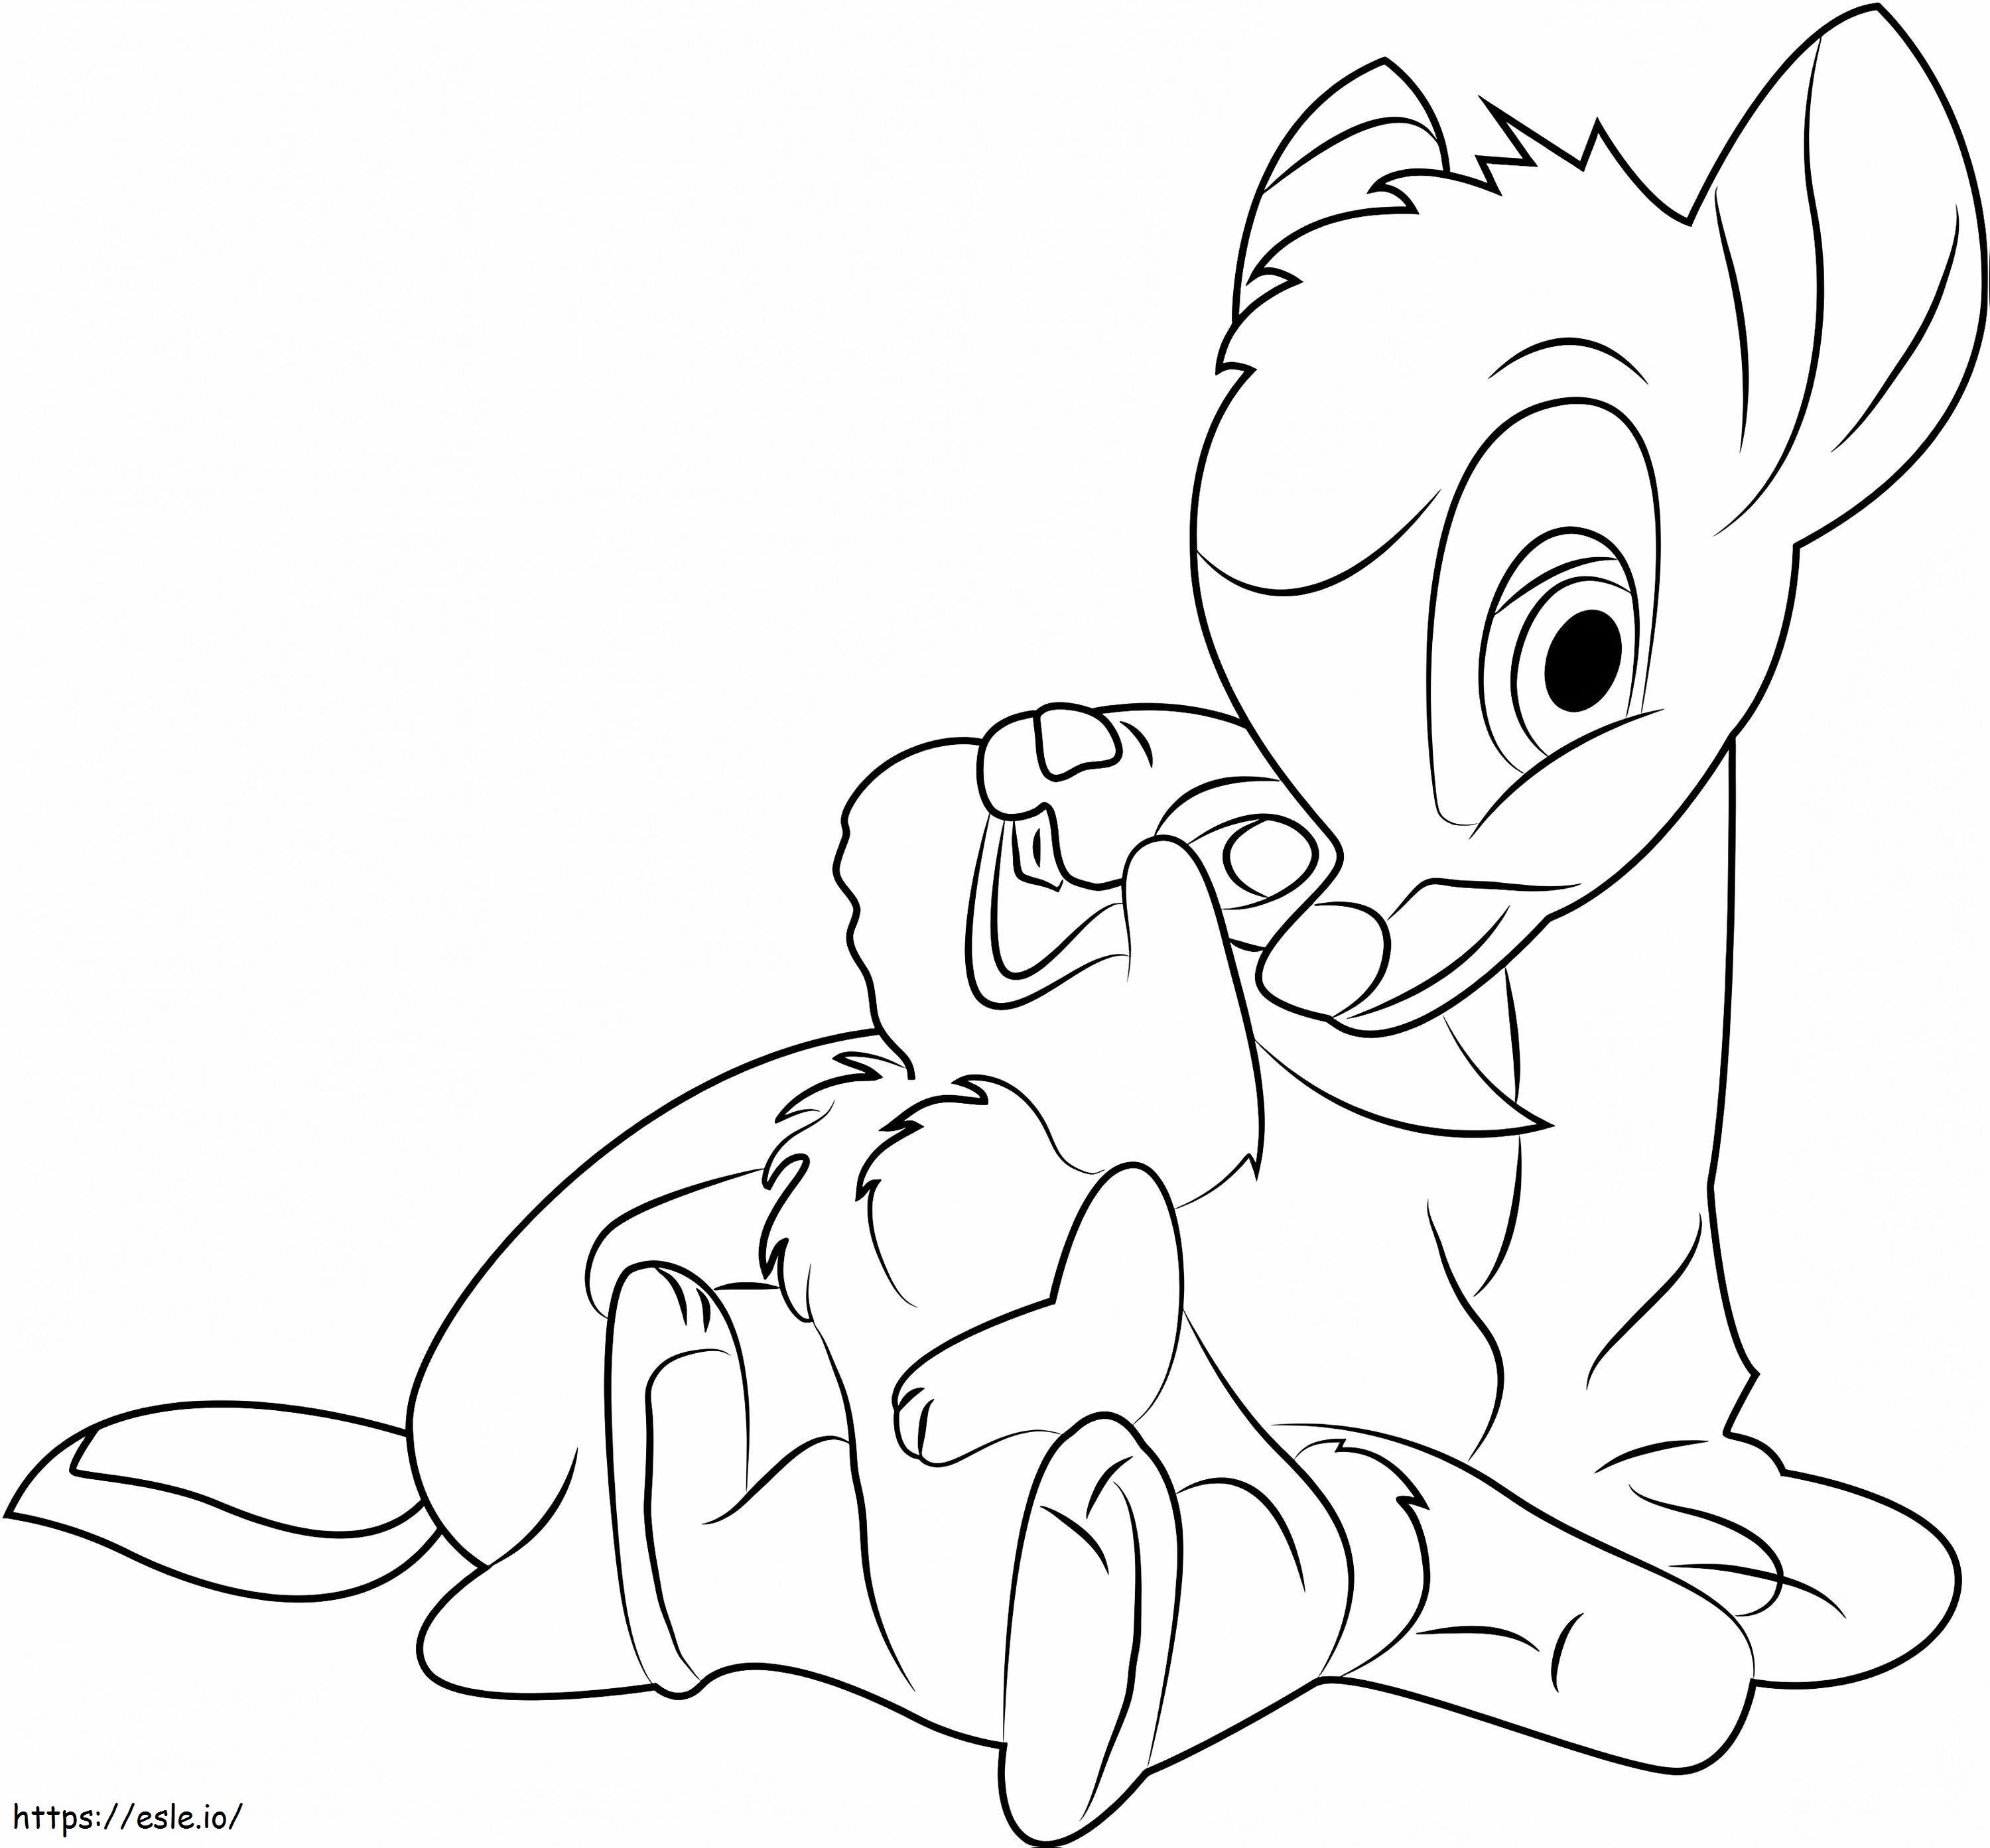 Bambi And Thumper A4 coloring page